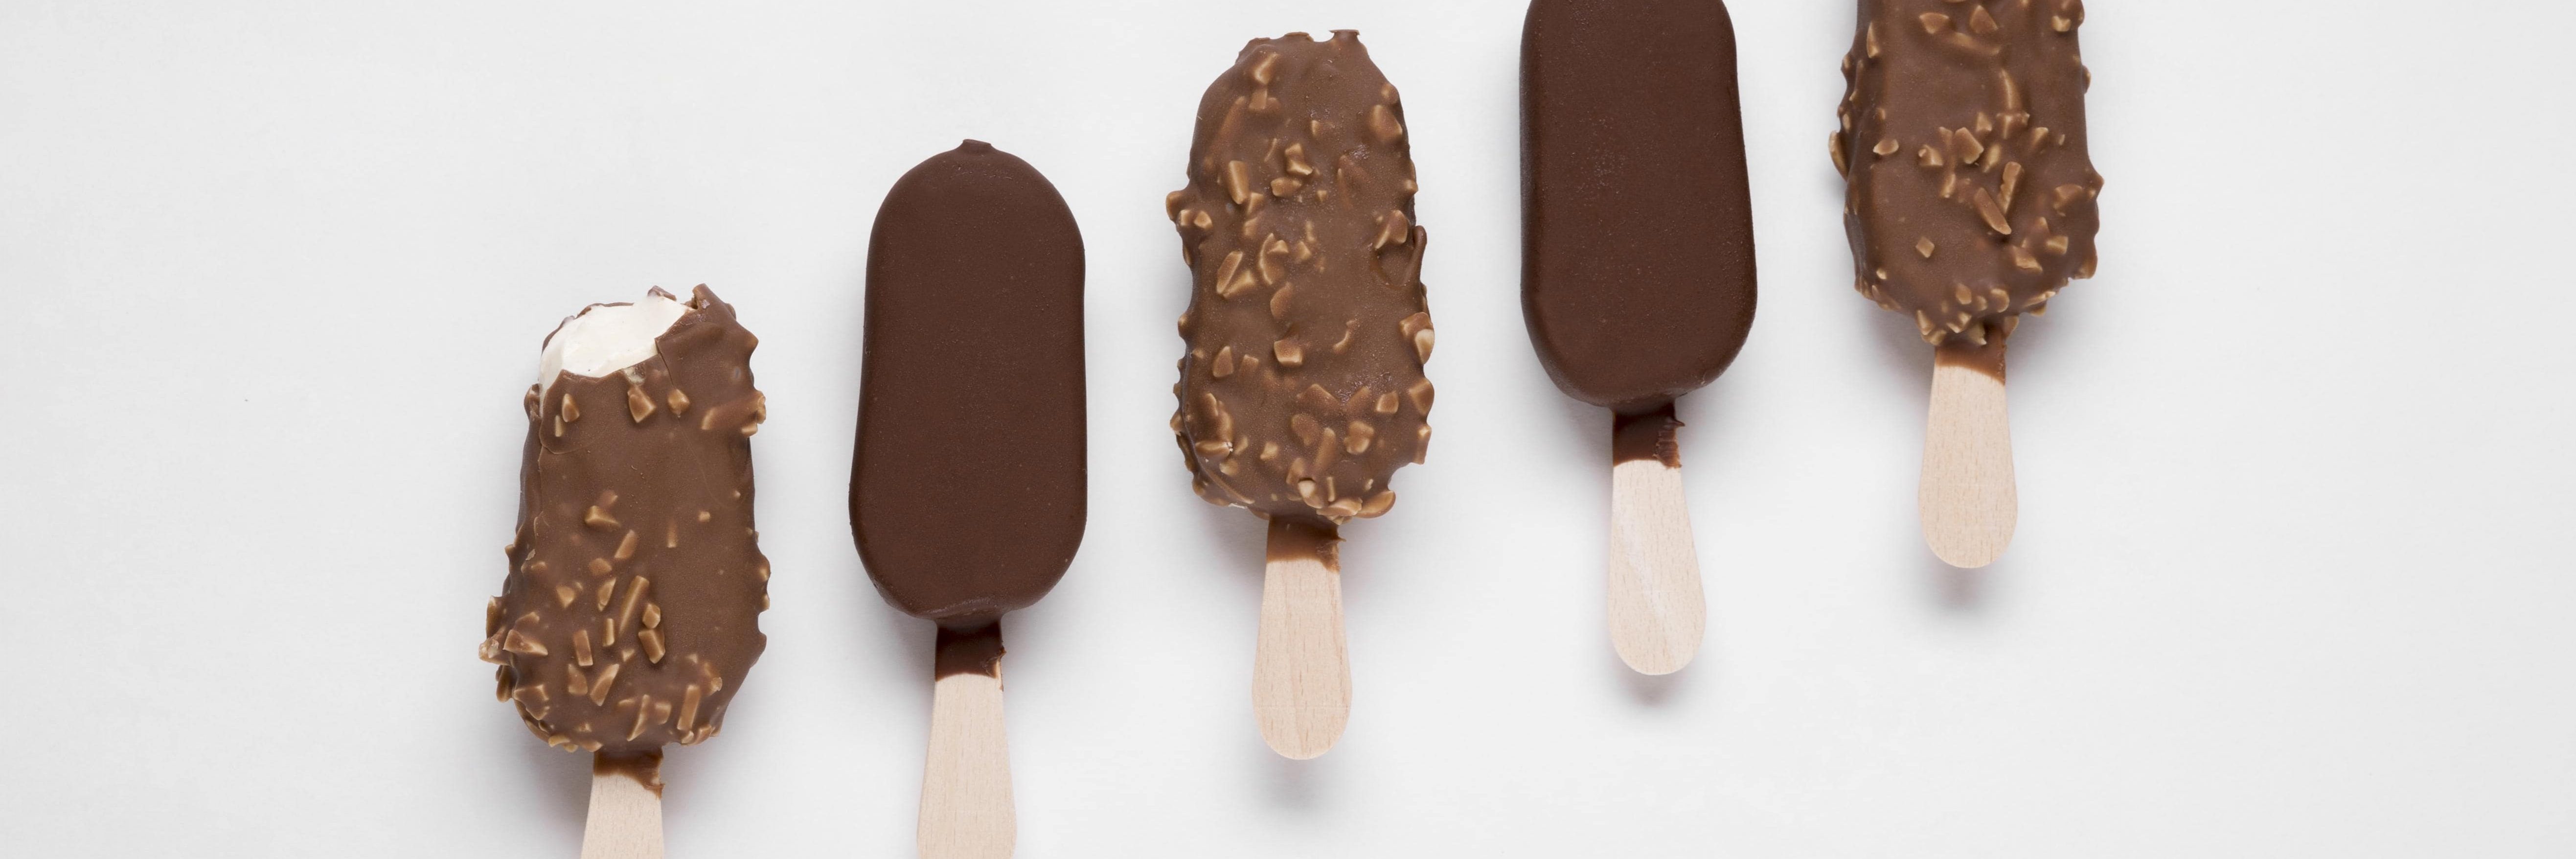 Ice cream trends towards more transparent and ethical ingredients